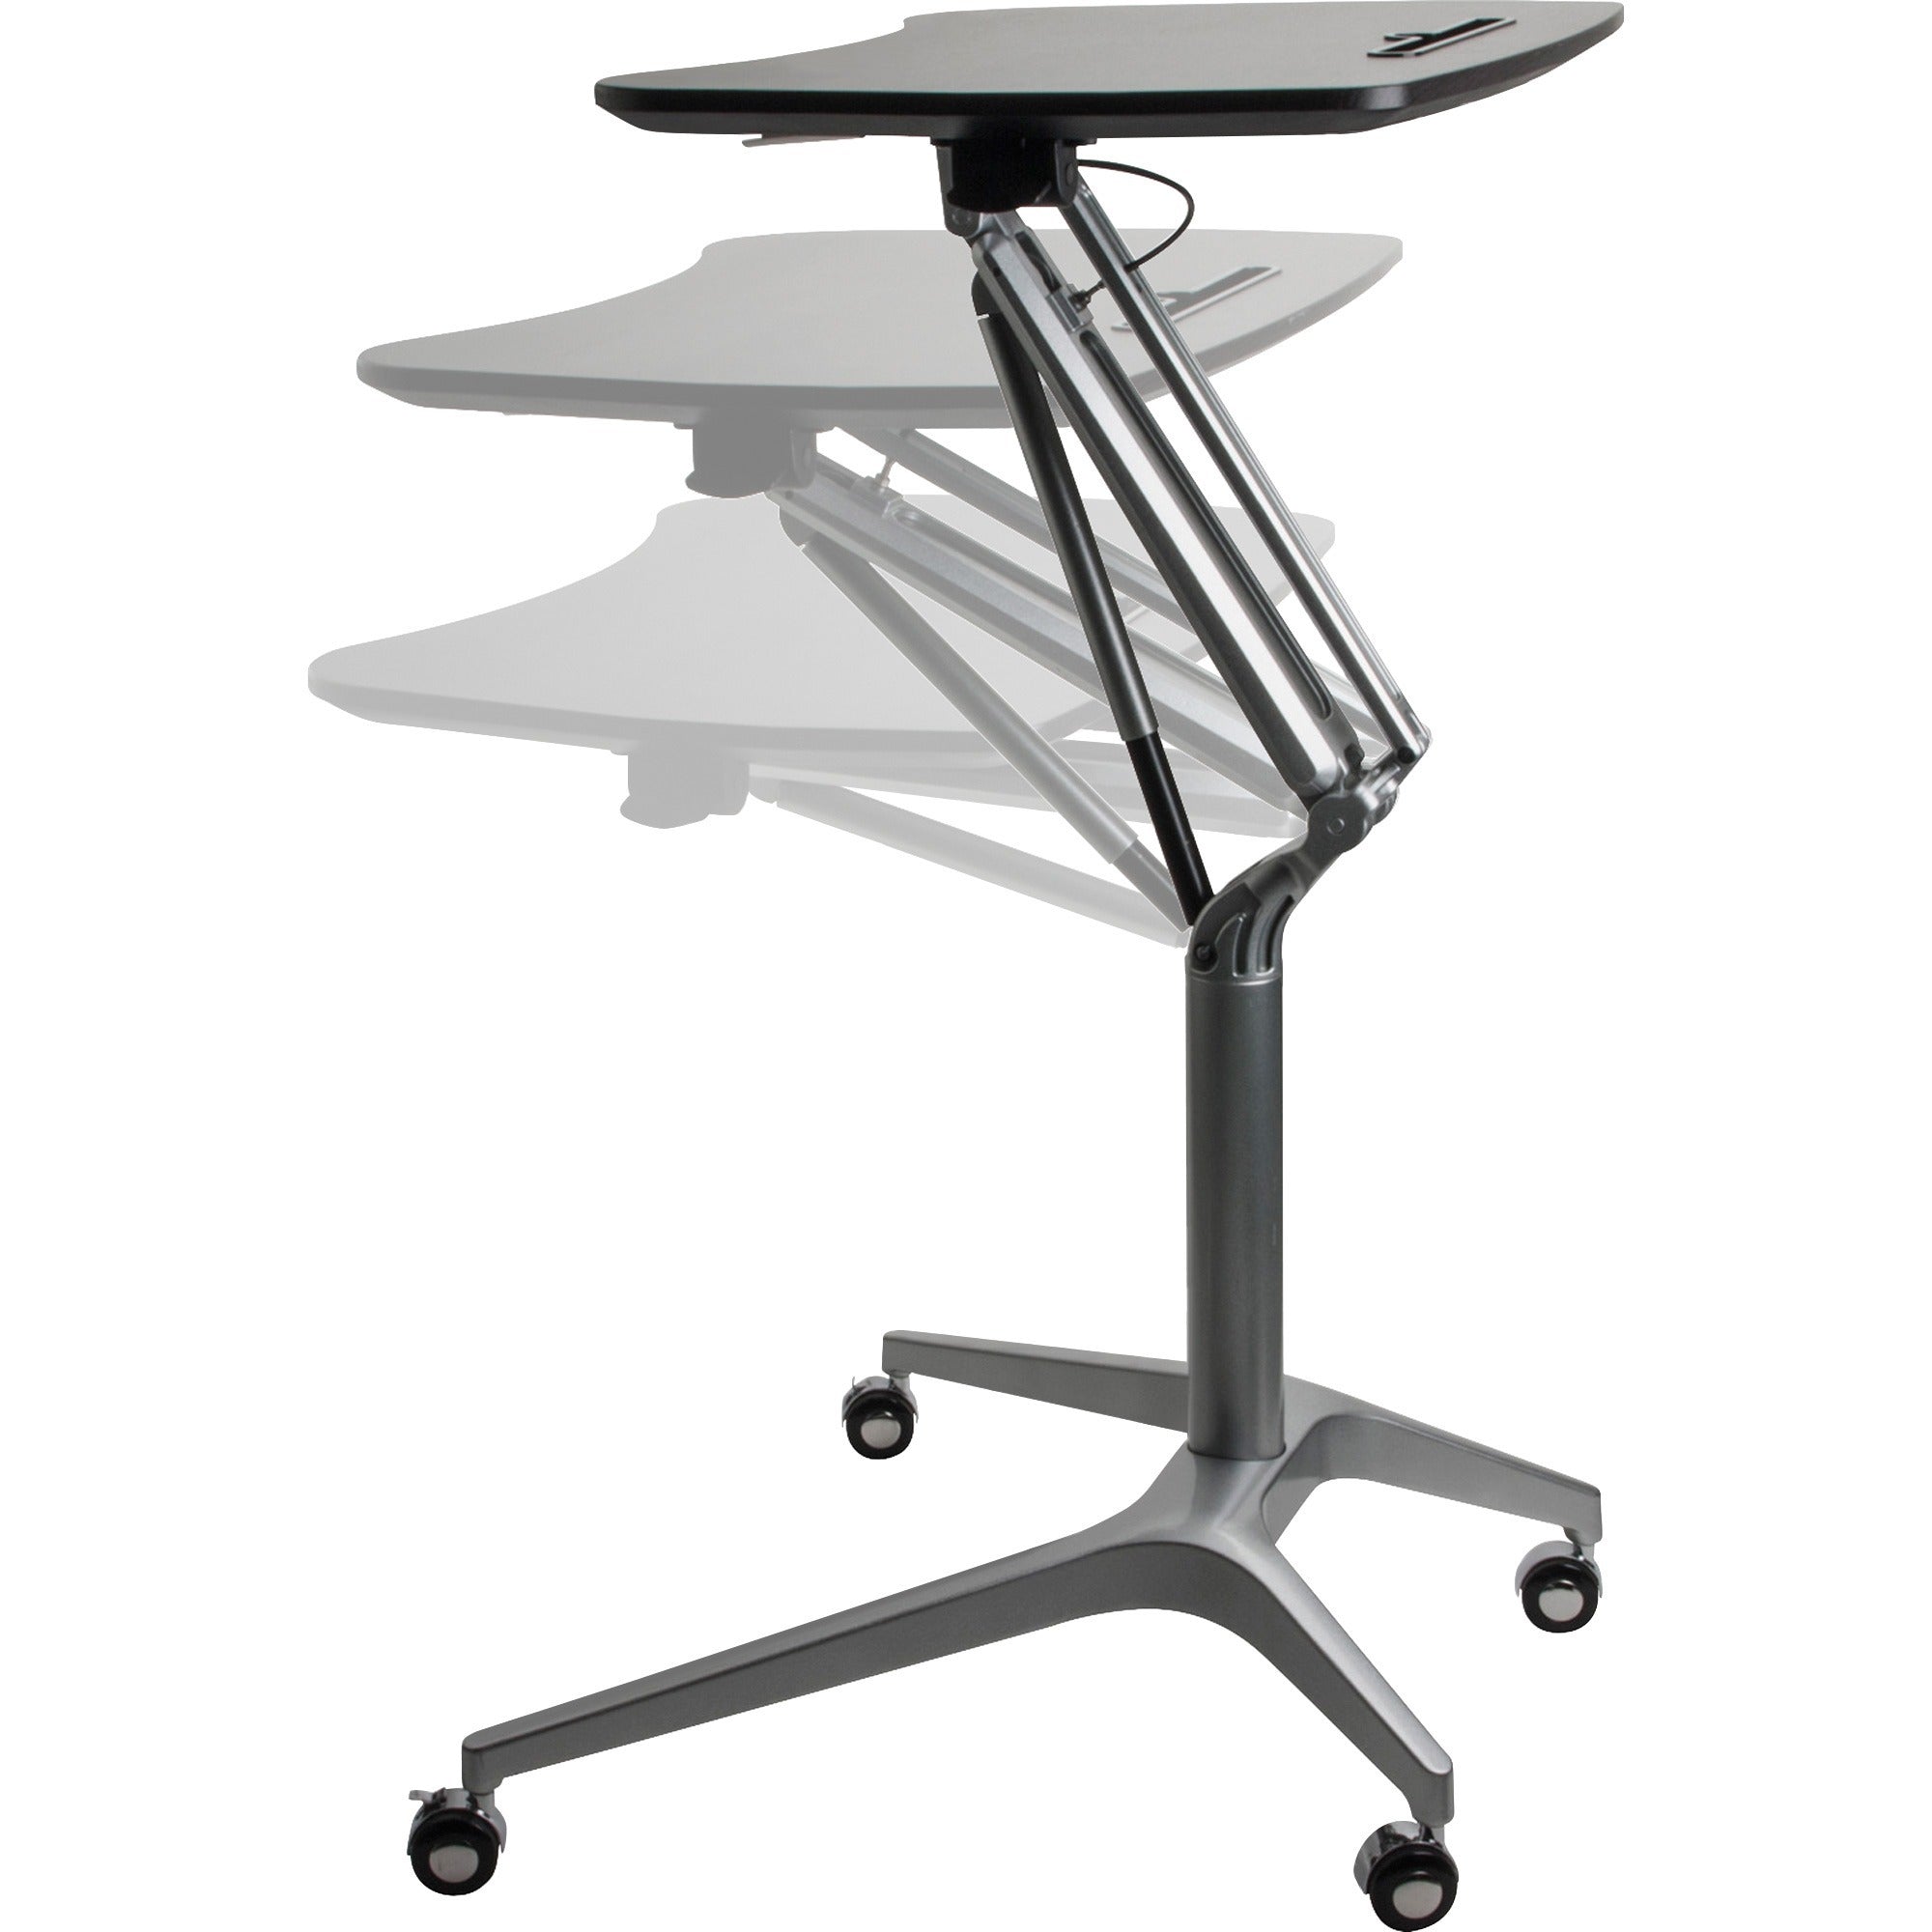 lorell-gas-lift-height-adjustable-mobile-desk-for-table-topblack-rectangle-top-powder-coated-base-adjustable-height-2870-to-4090-adjustment-x-2825-table-top-width-x-1875-table-top-depth-41-height-assembly-required-1-each_llr84838 - 1